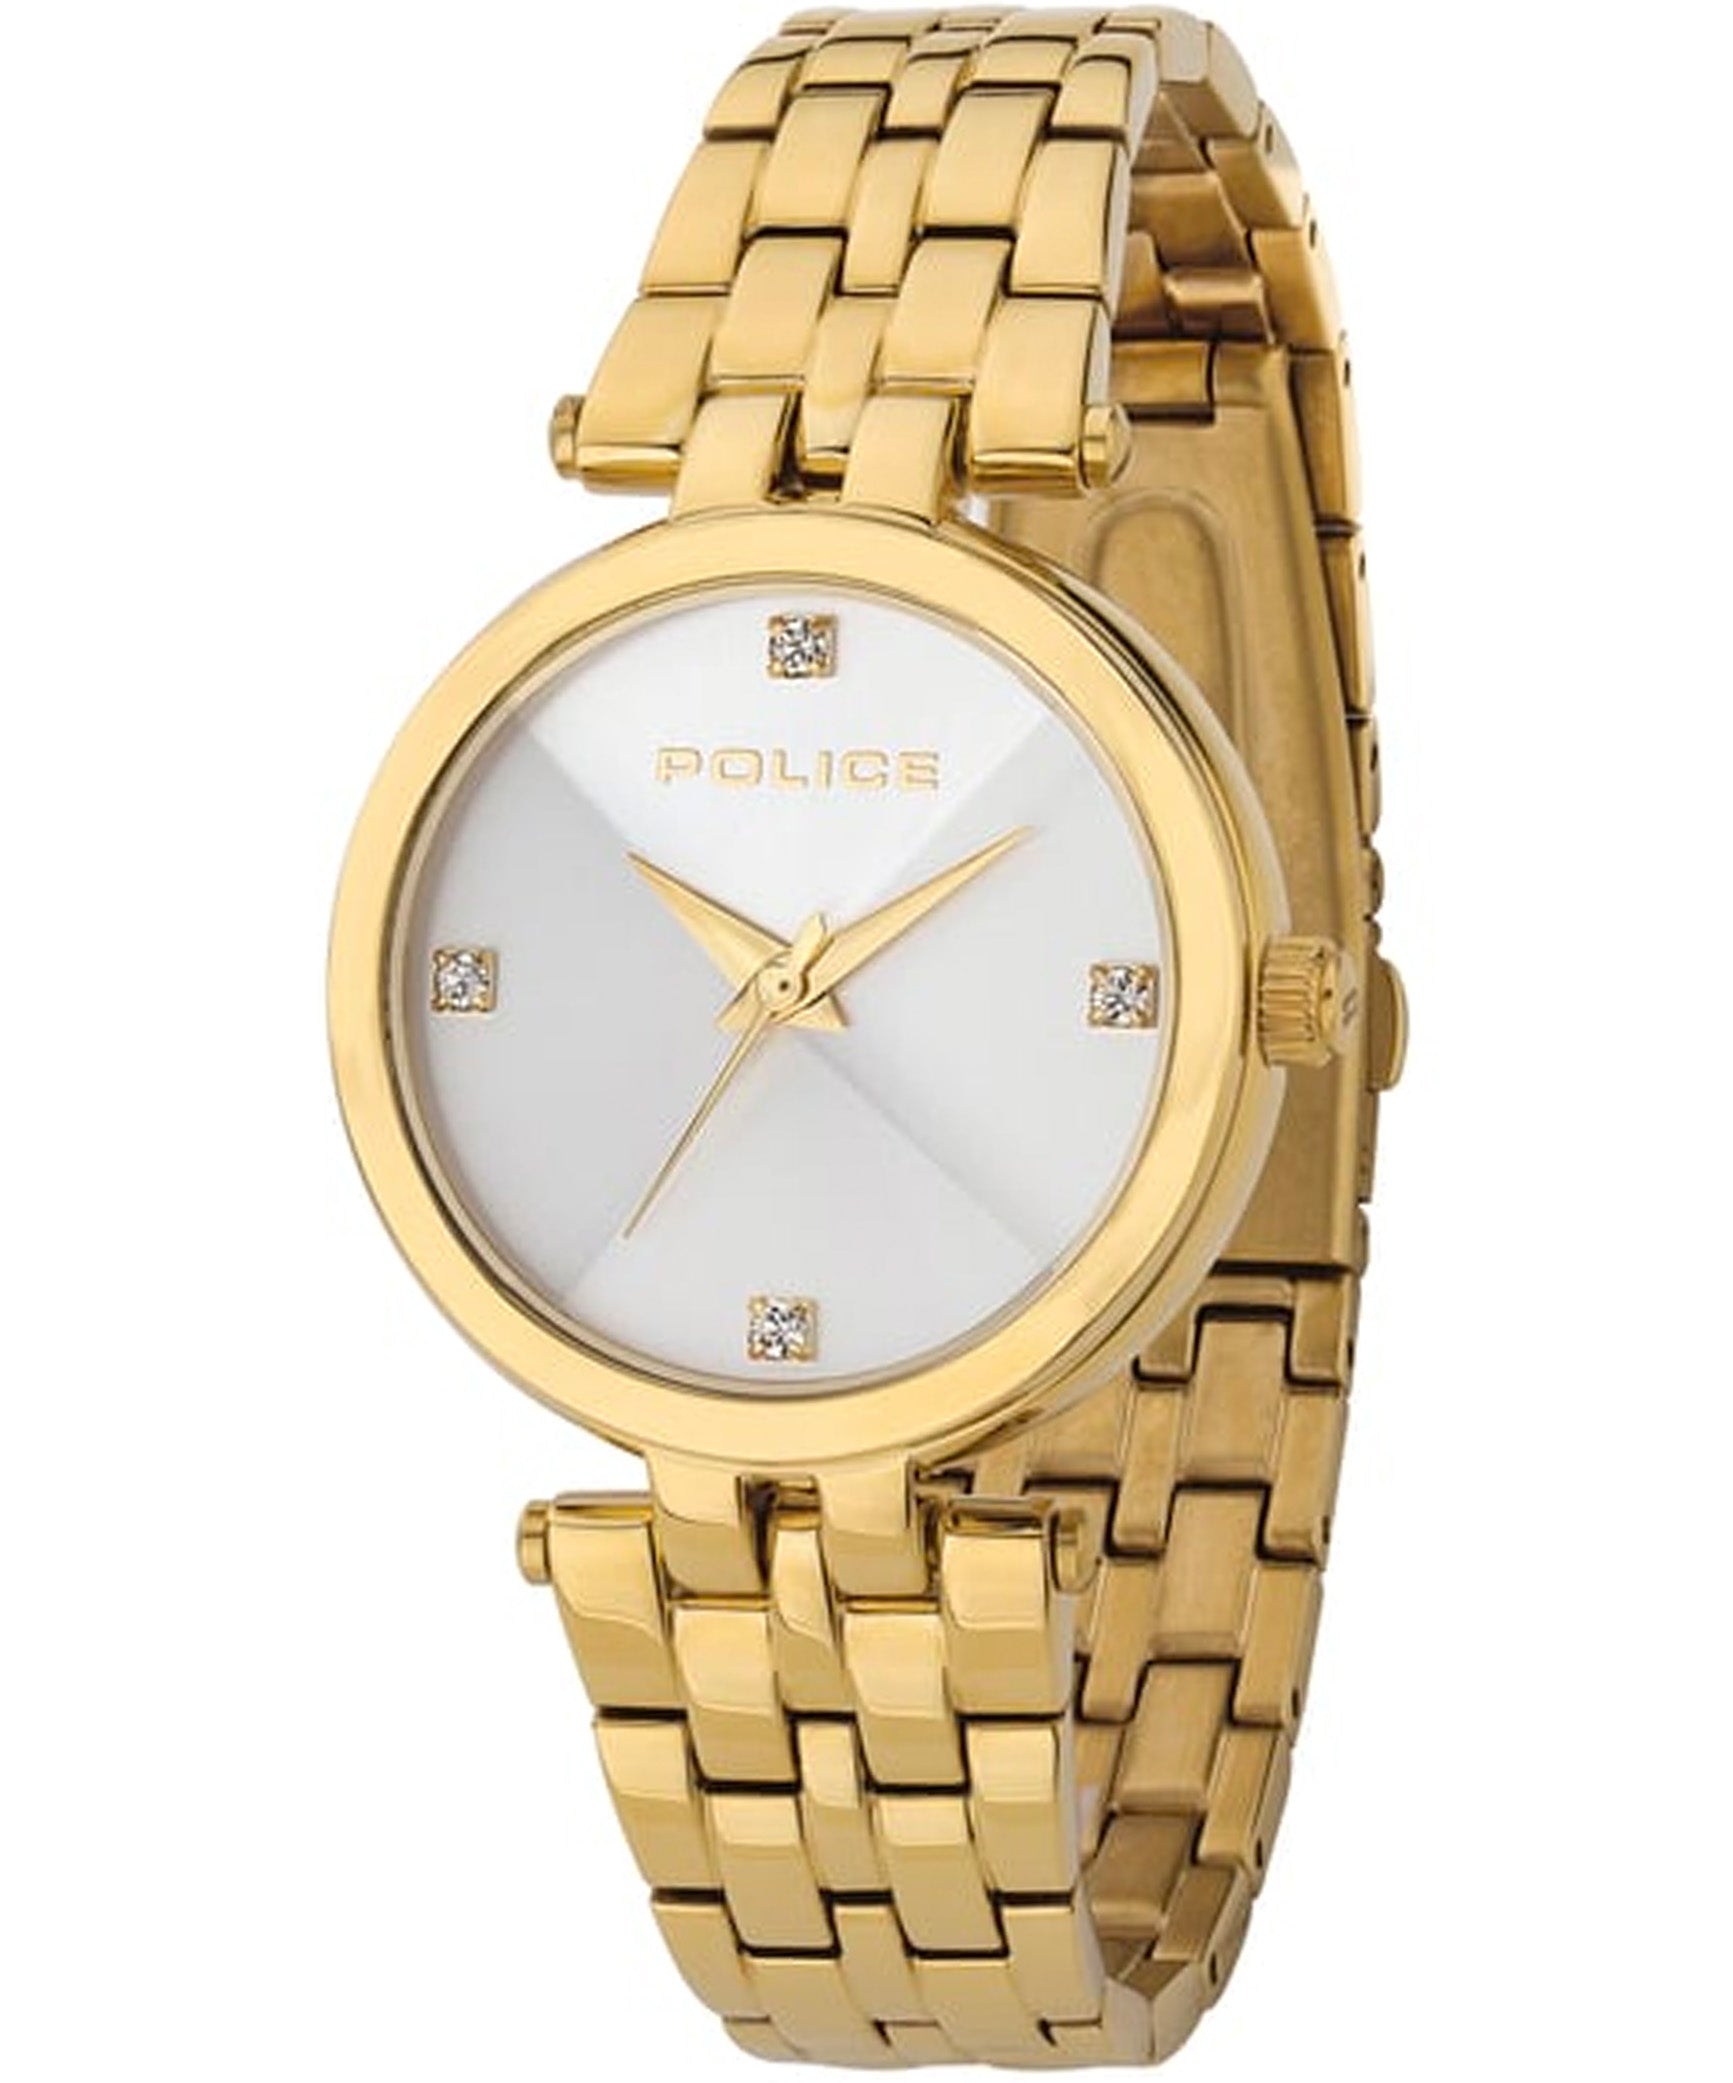 Police Women's Watch Analog, Pyramid White Dial Gold Stainless Band, P14870BSG-D0